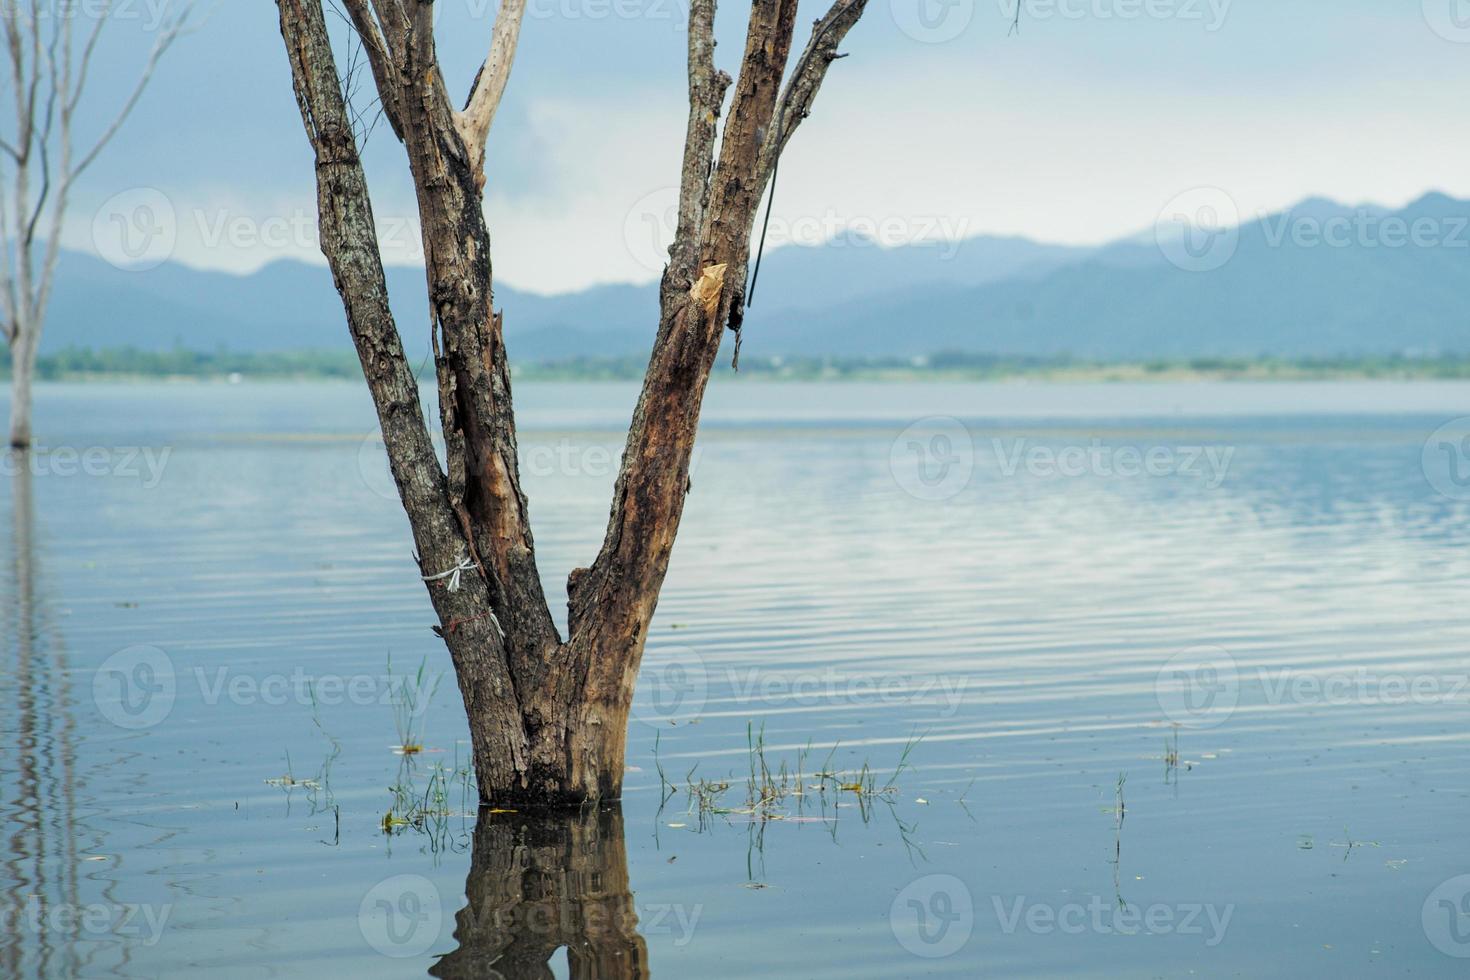 The body of the dead tree stands in the water with the landscape and lake in background photo